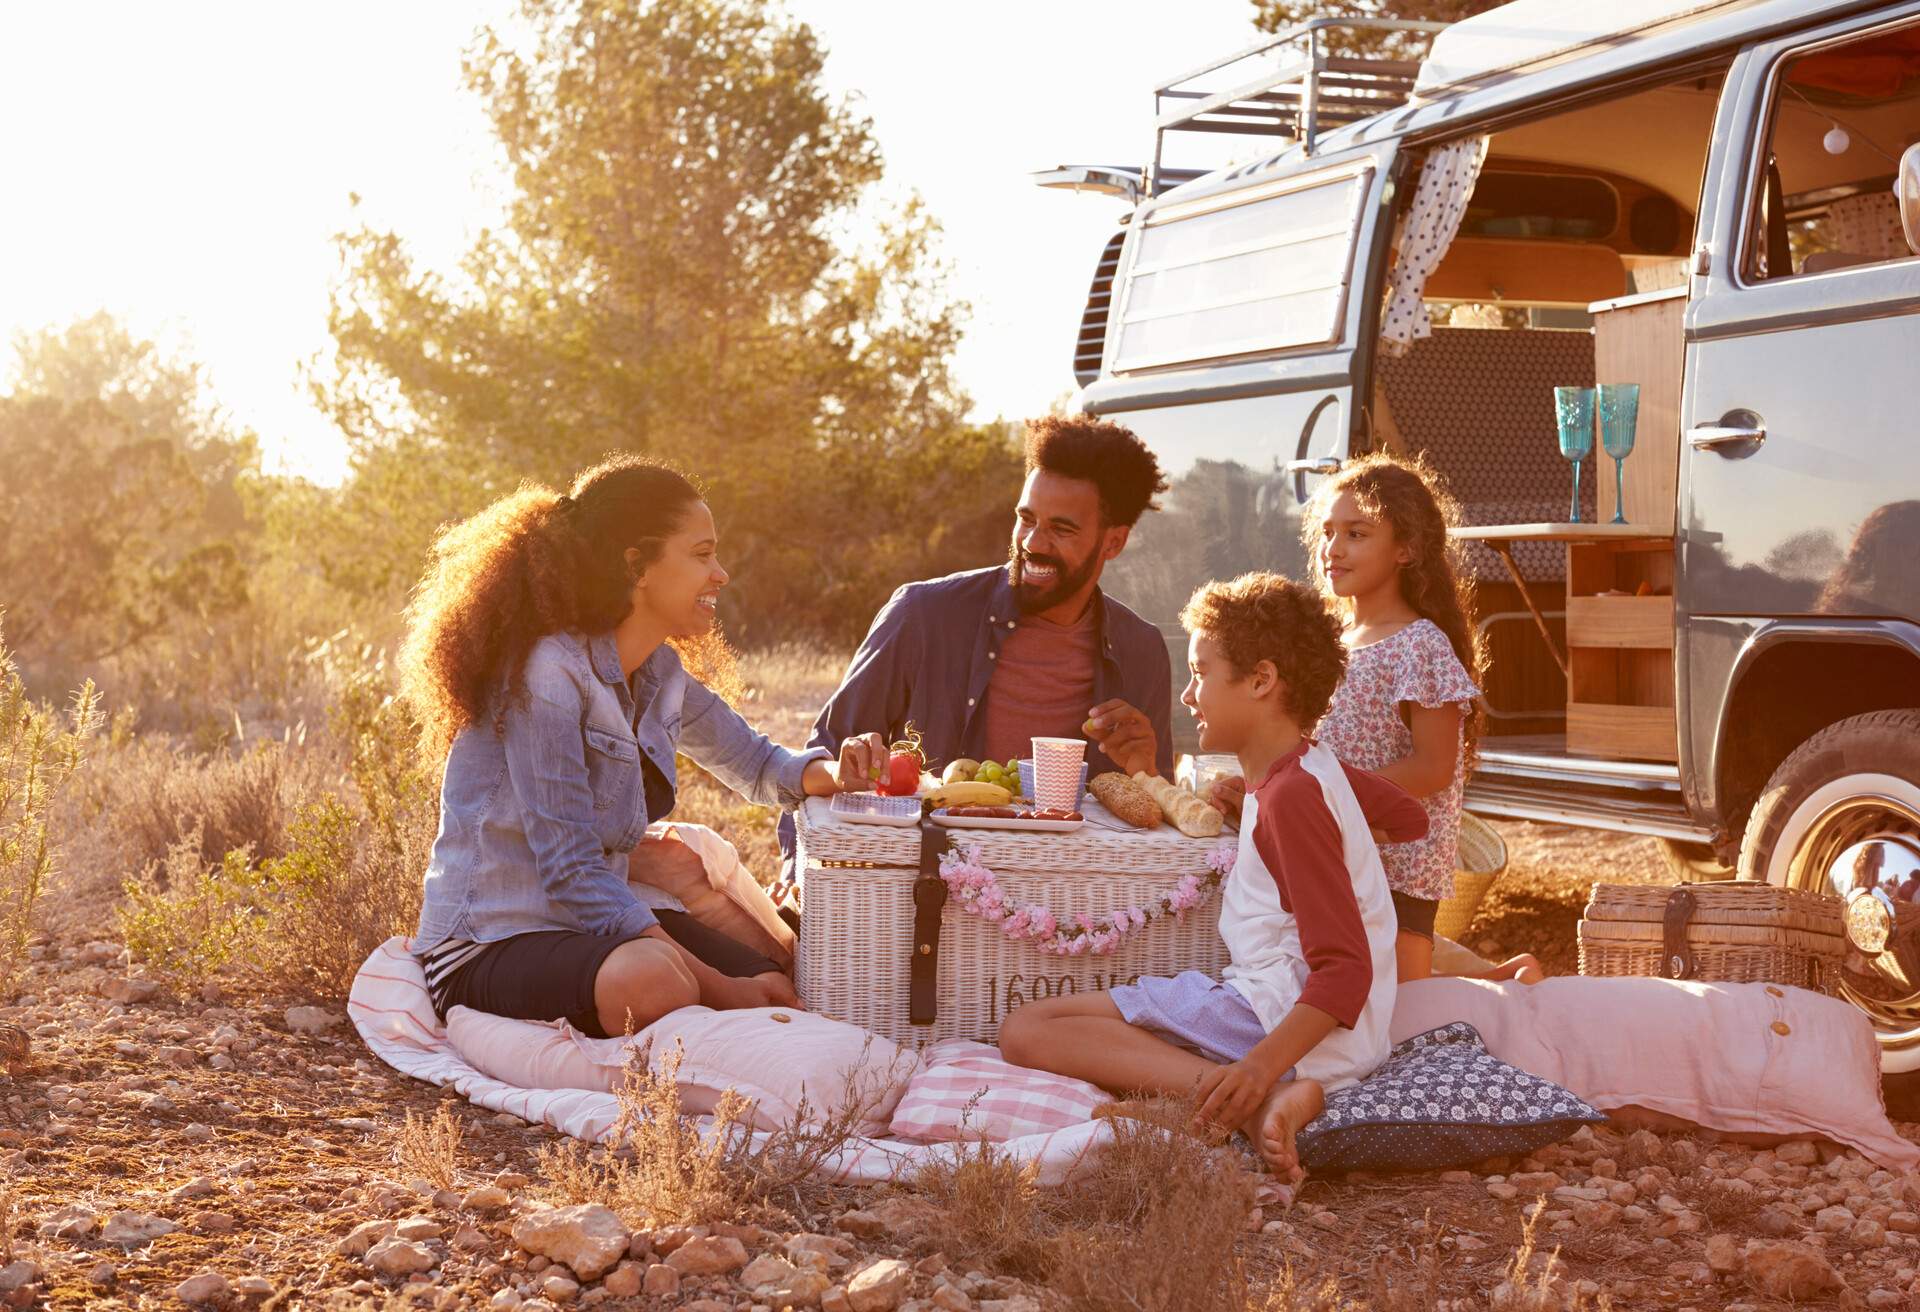 theme_travel_adventure_vacation_family_camping_camper